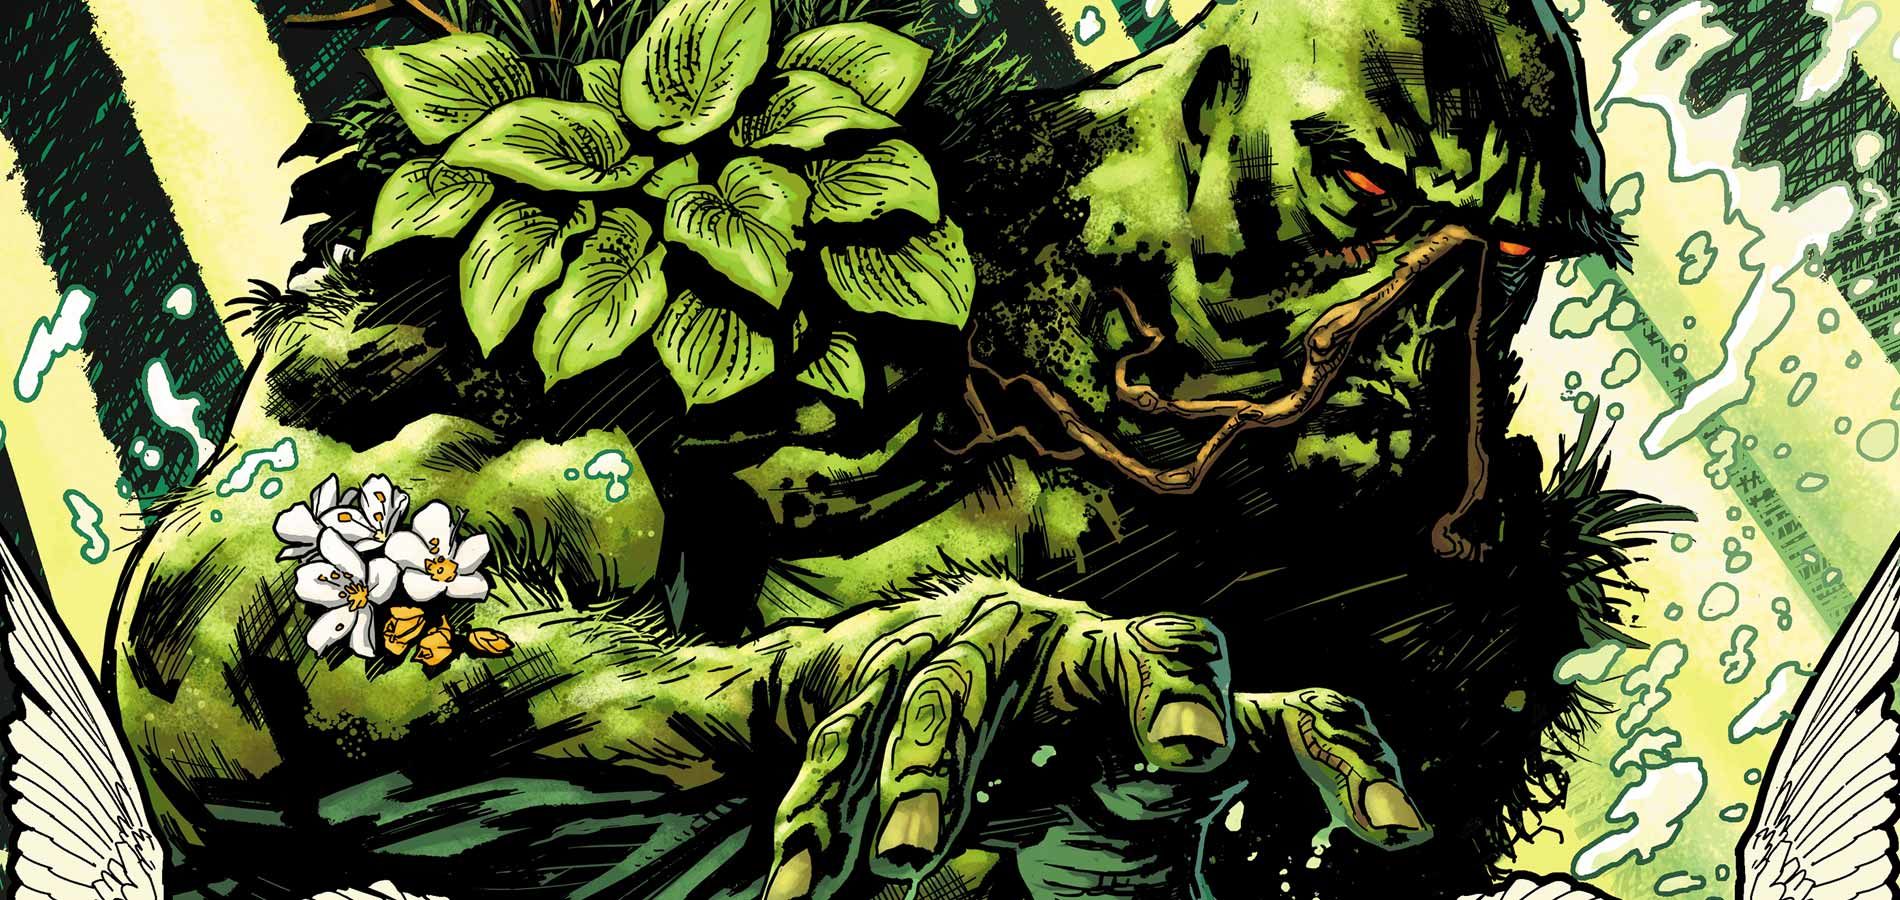 Swamp Thing official